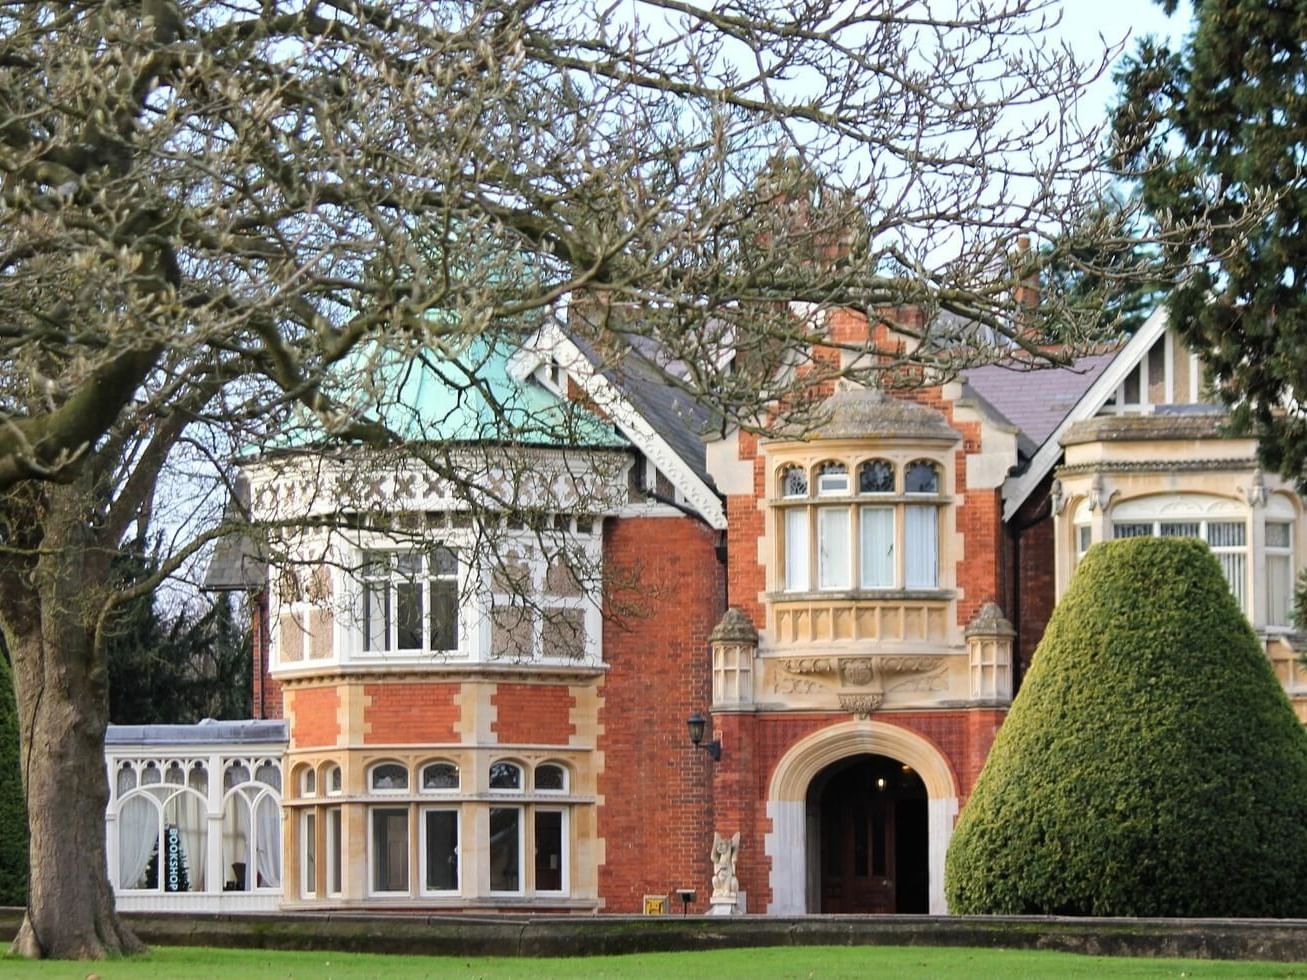 Exterior of Bletchley Park 